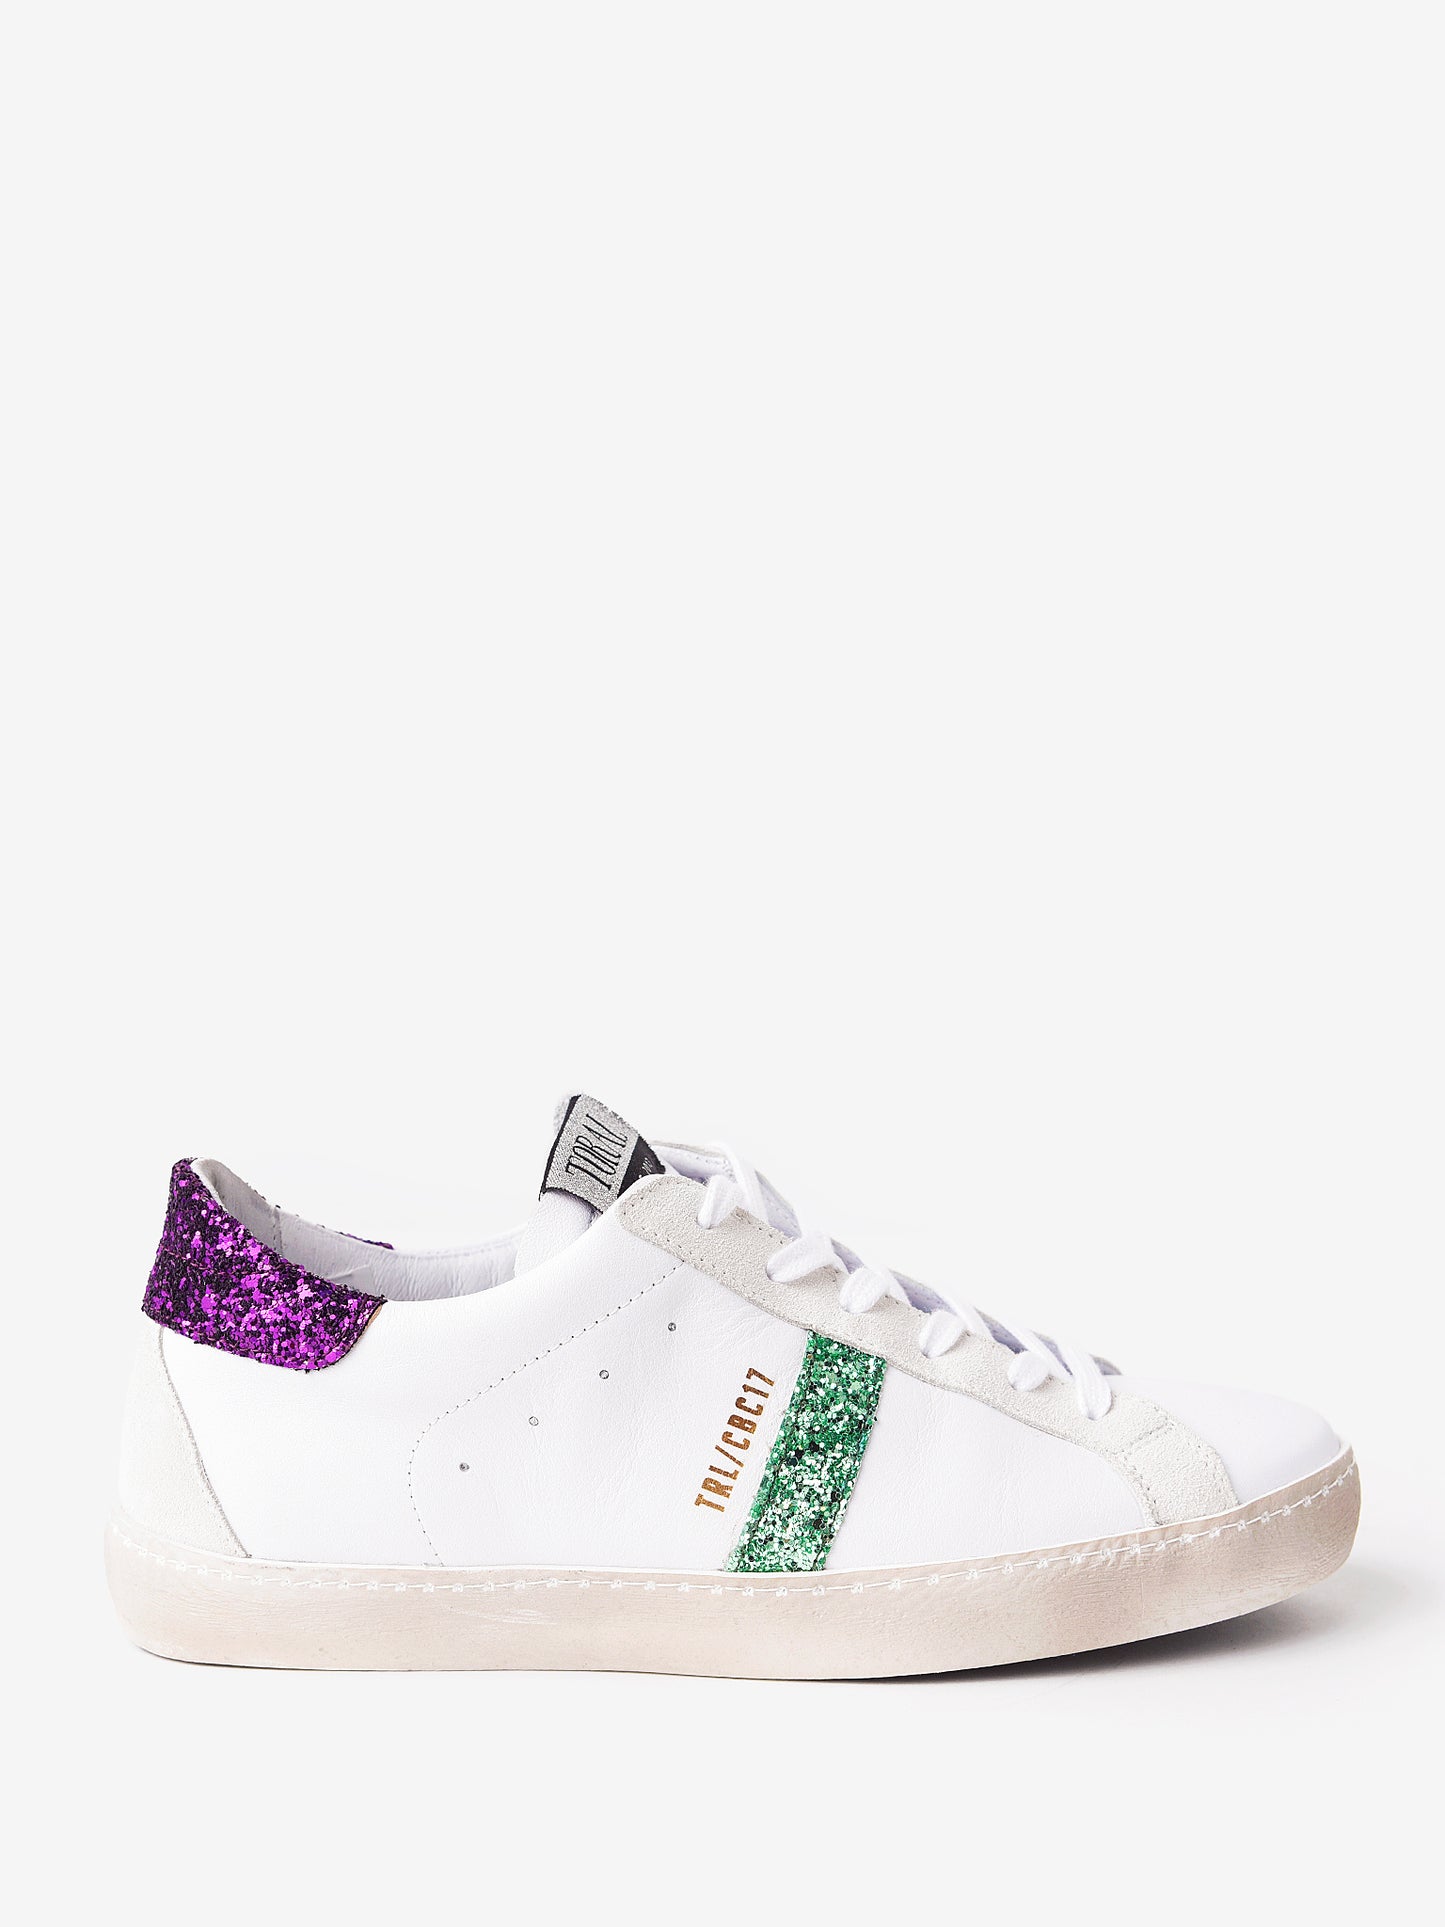 Toral Day Leather Glitter Sneaker